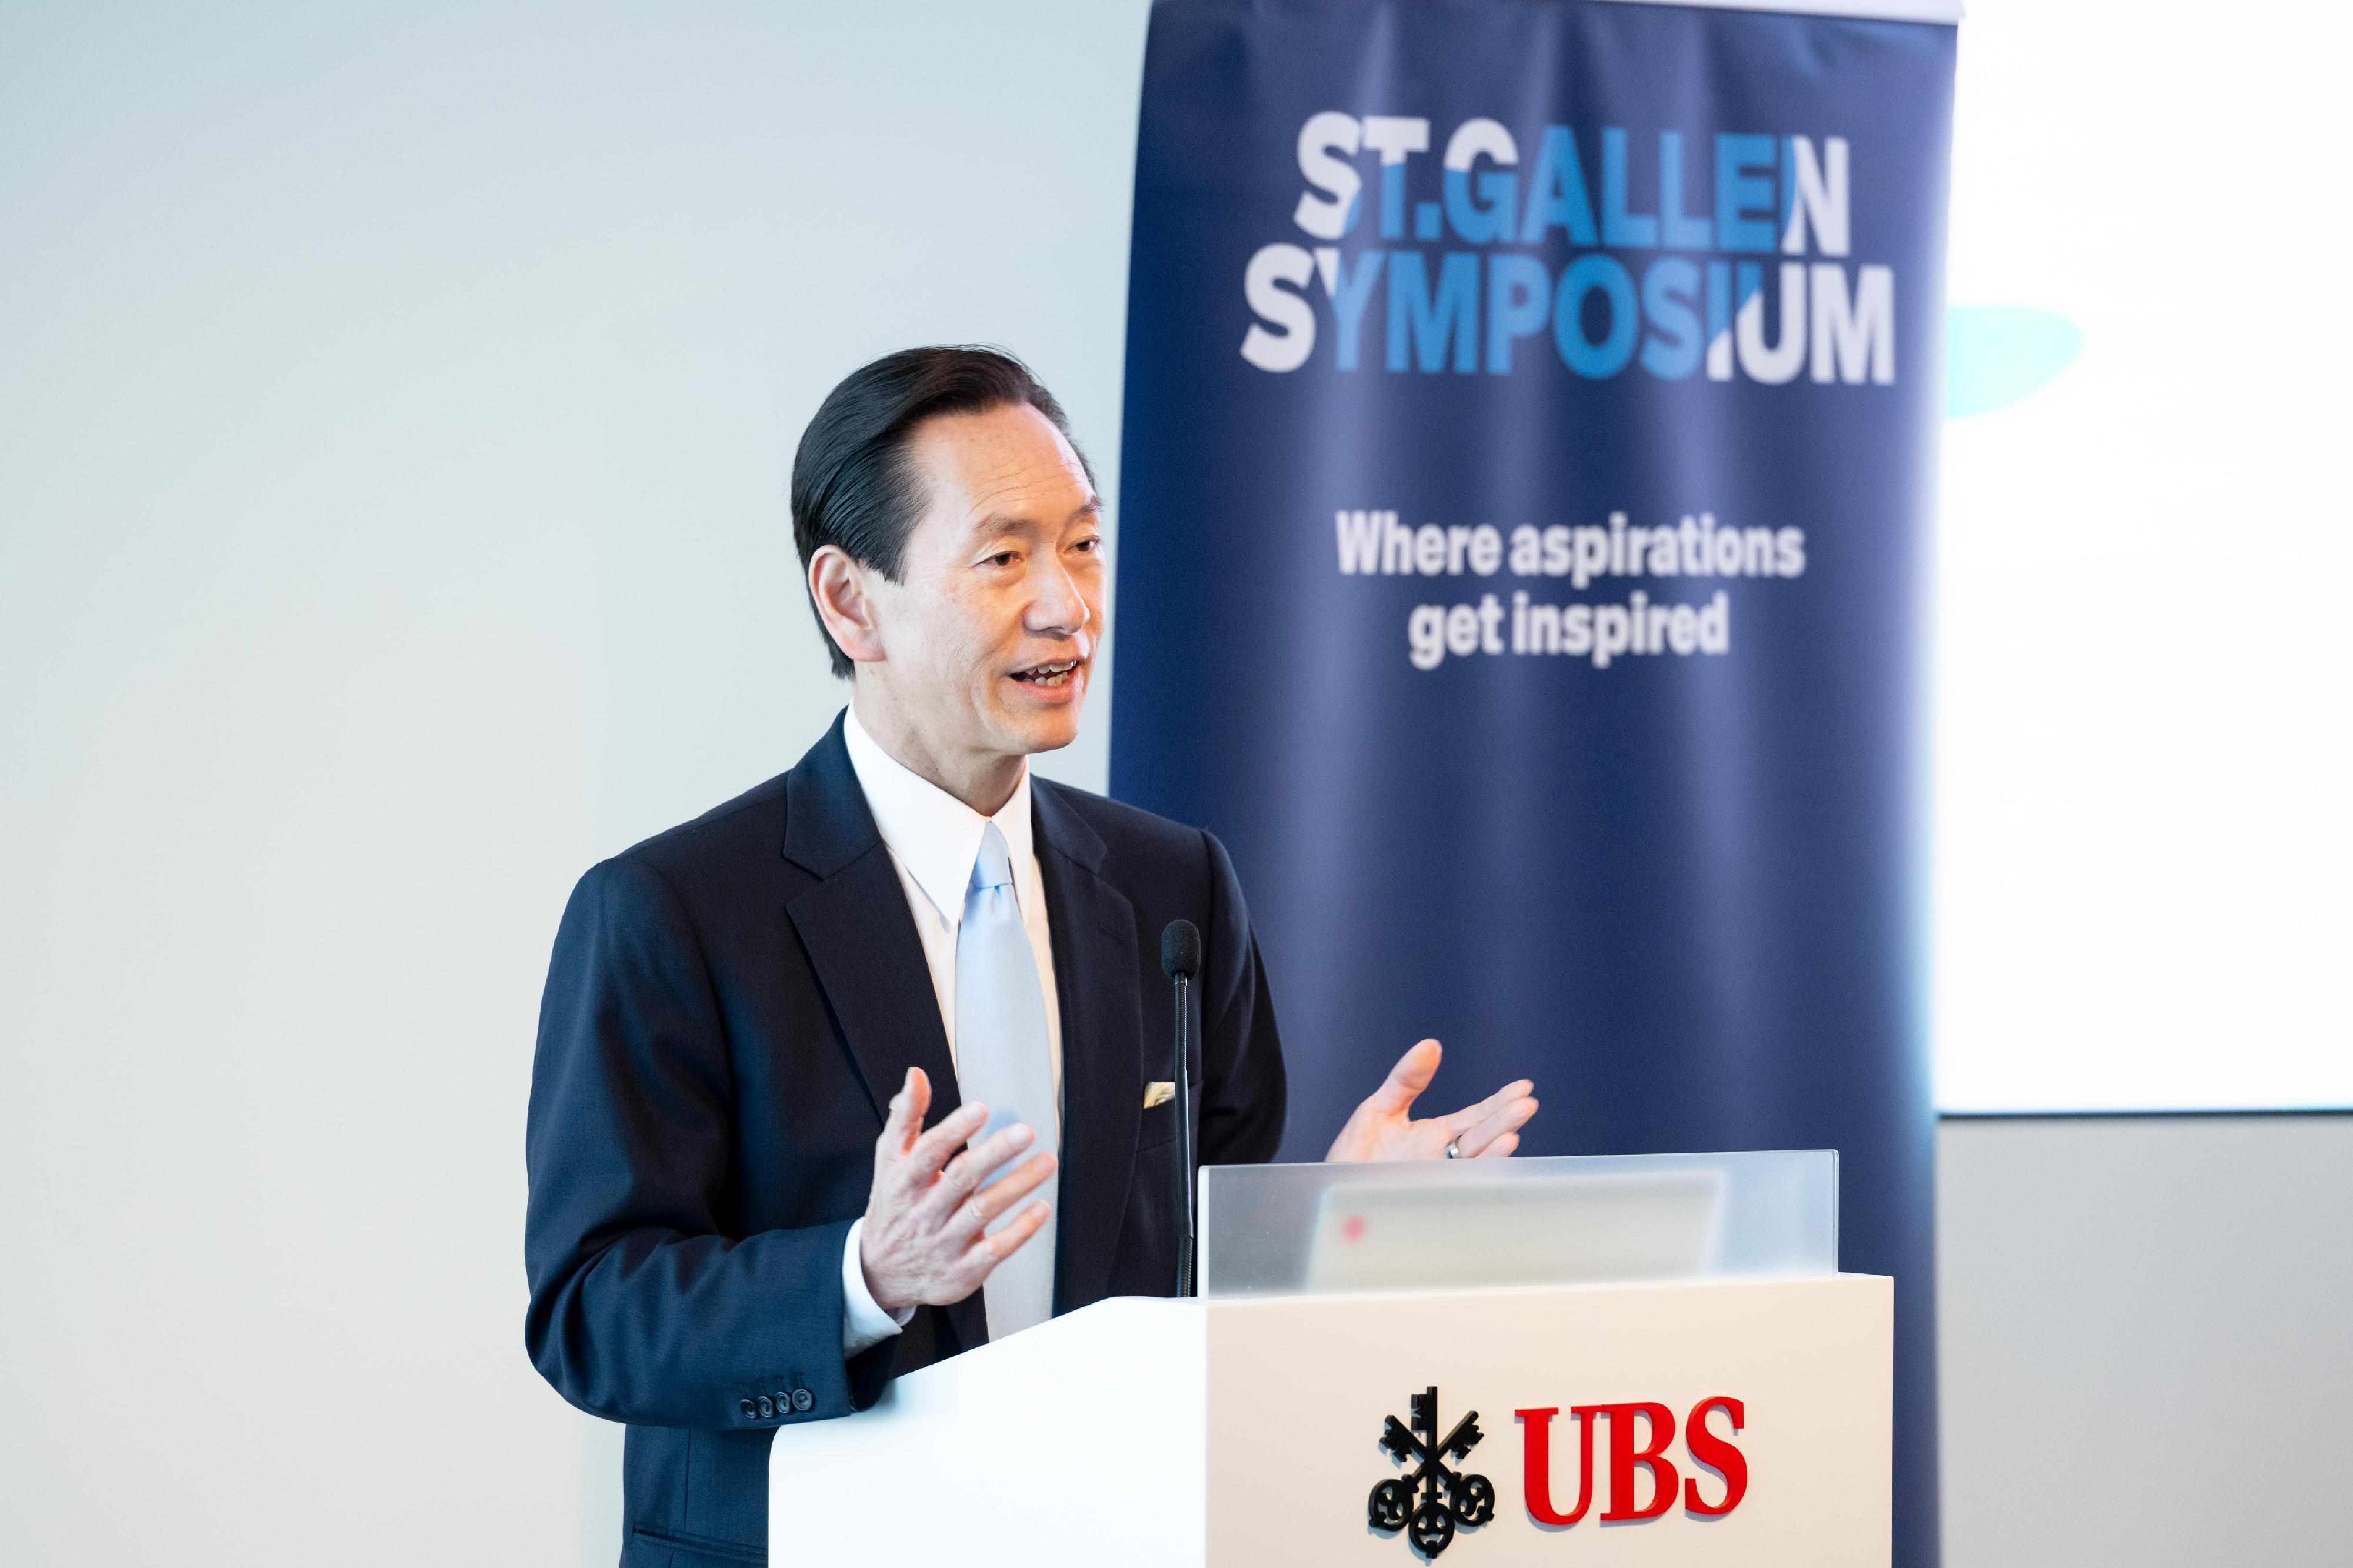 Photo shows the Chairman of Our Hong Kong Foundation, Mr Bernard Chan, speaking at the St. Gallen Symposium Hong Kong - GBA Forum 2023.